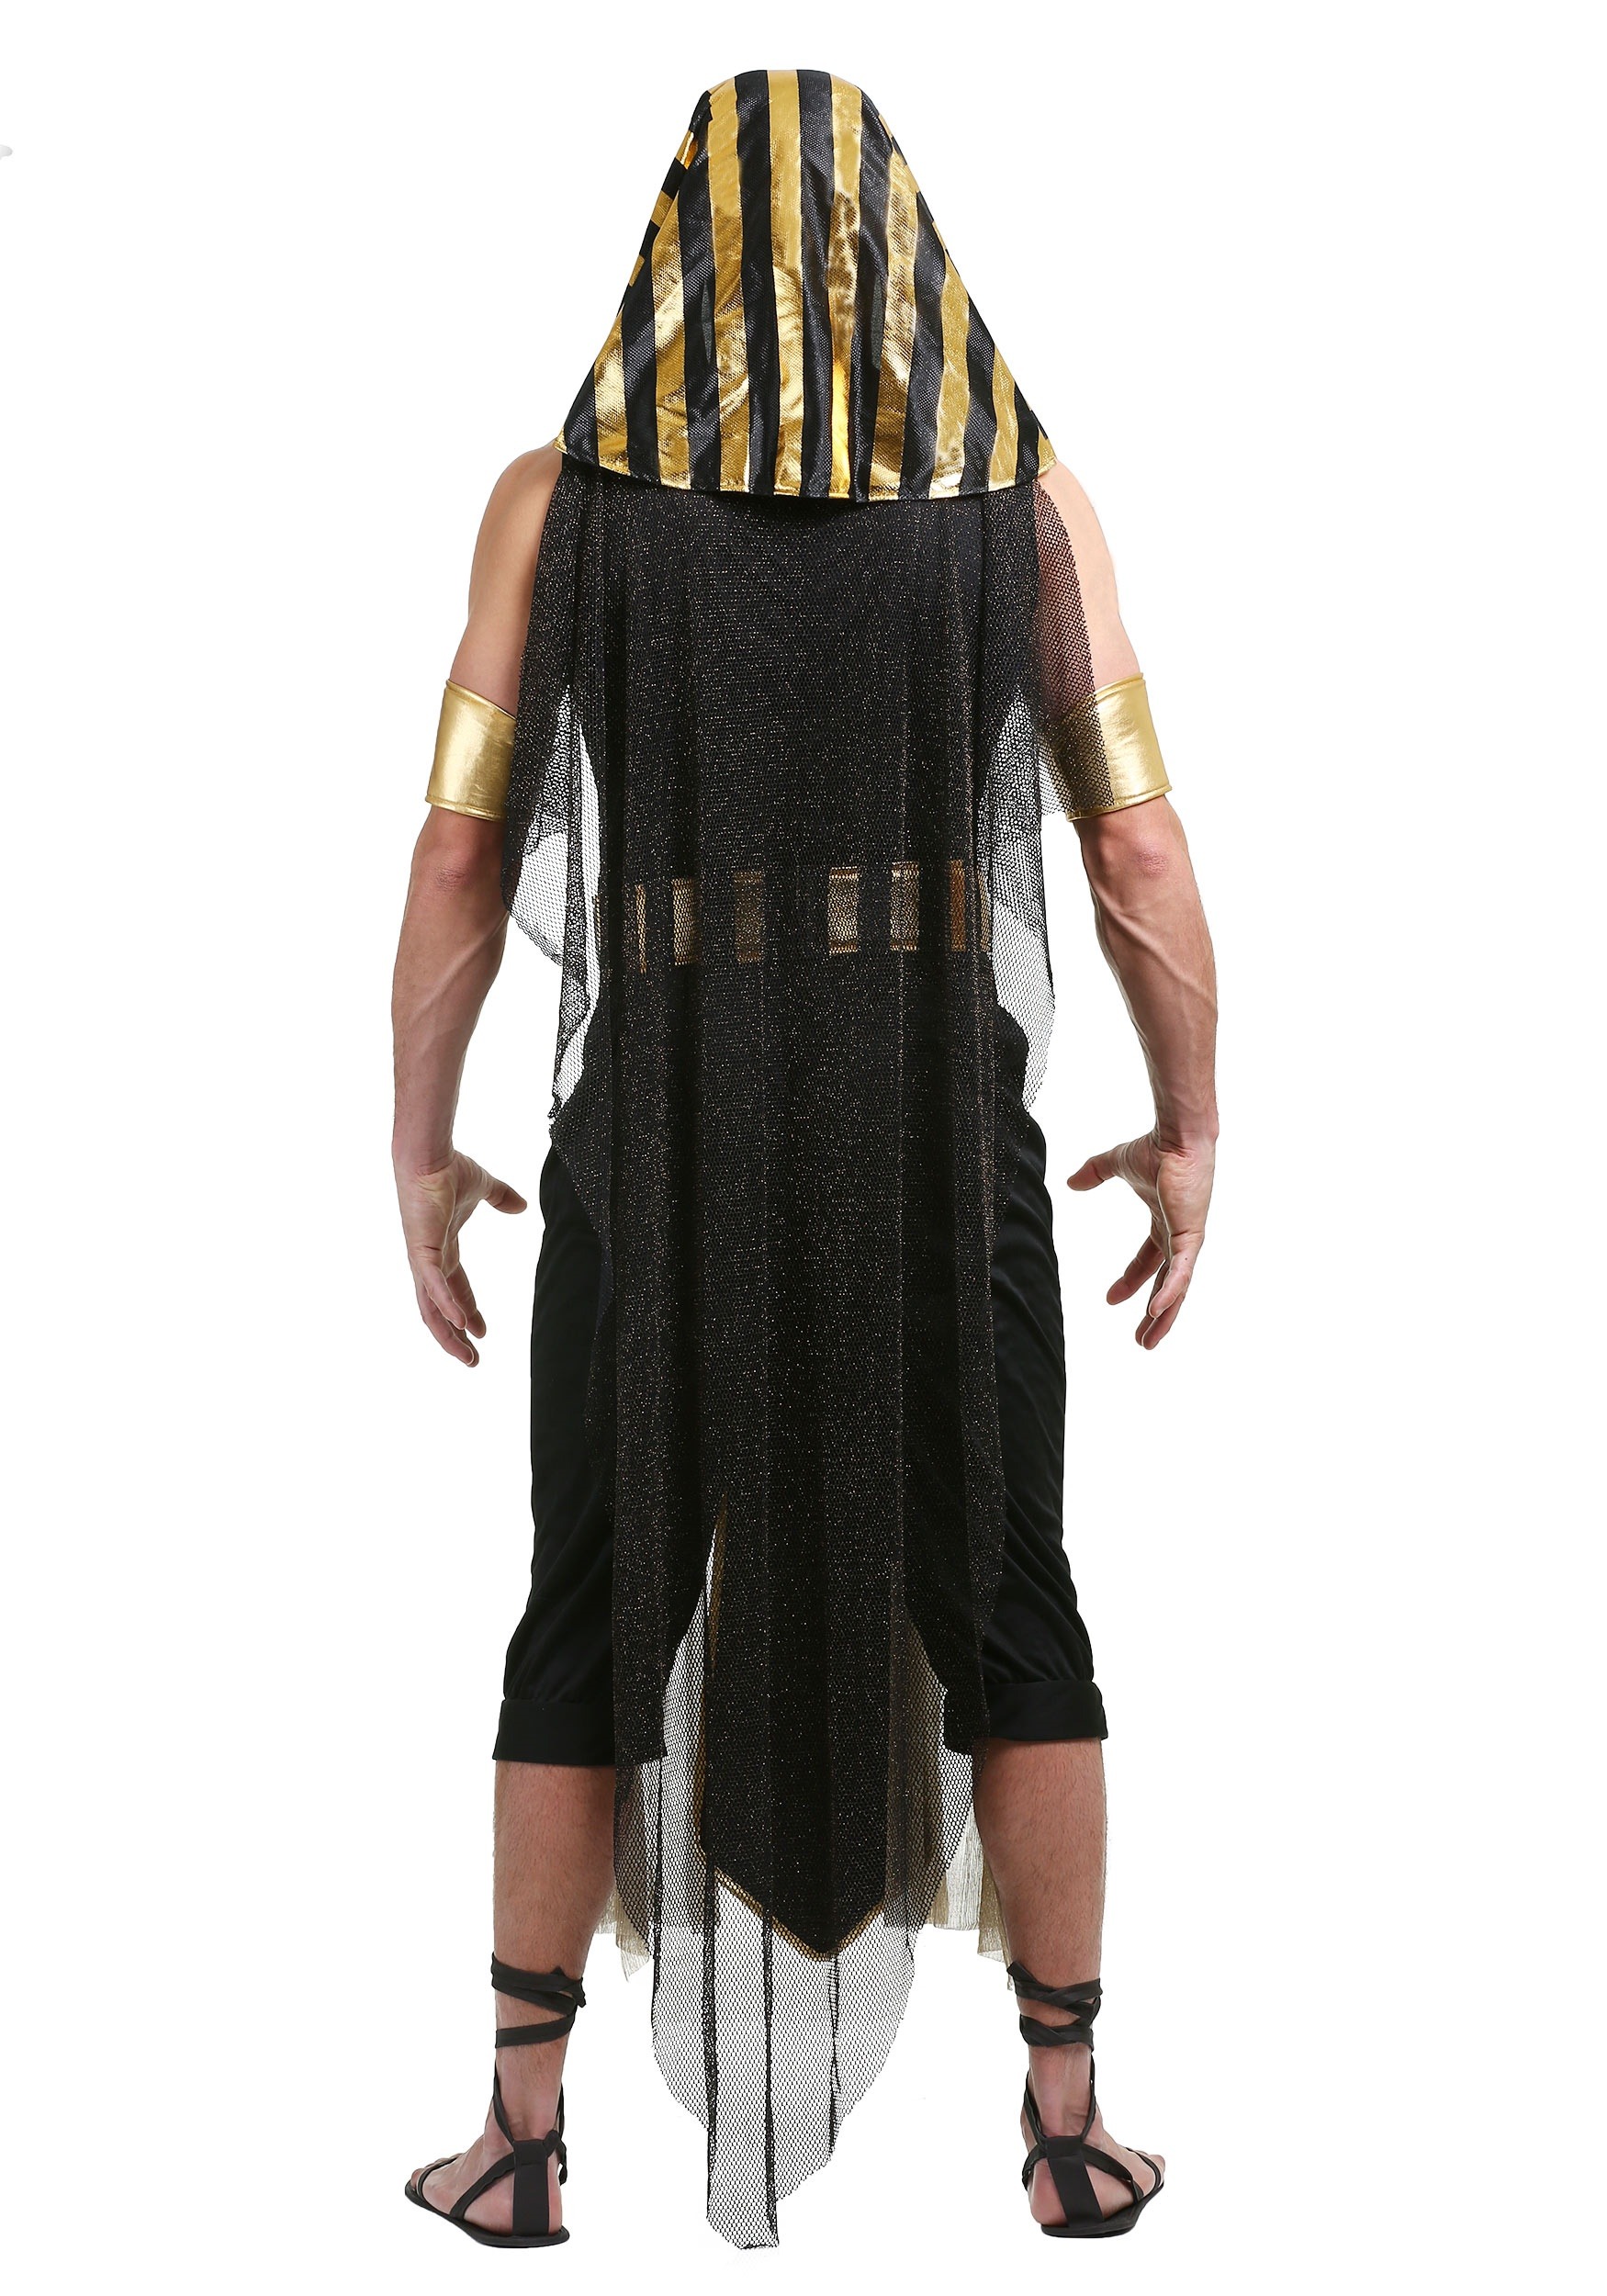 All Powerful Pharaoh Plus Size Costume , Men's Plus Size Costumes